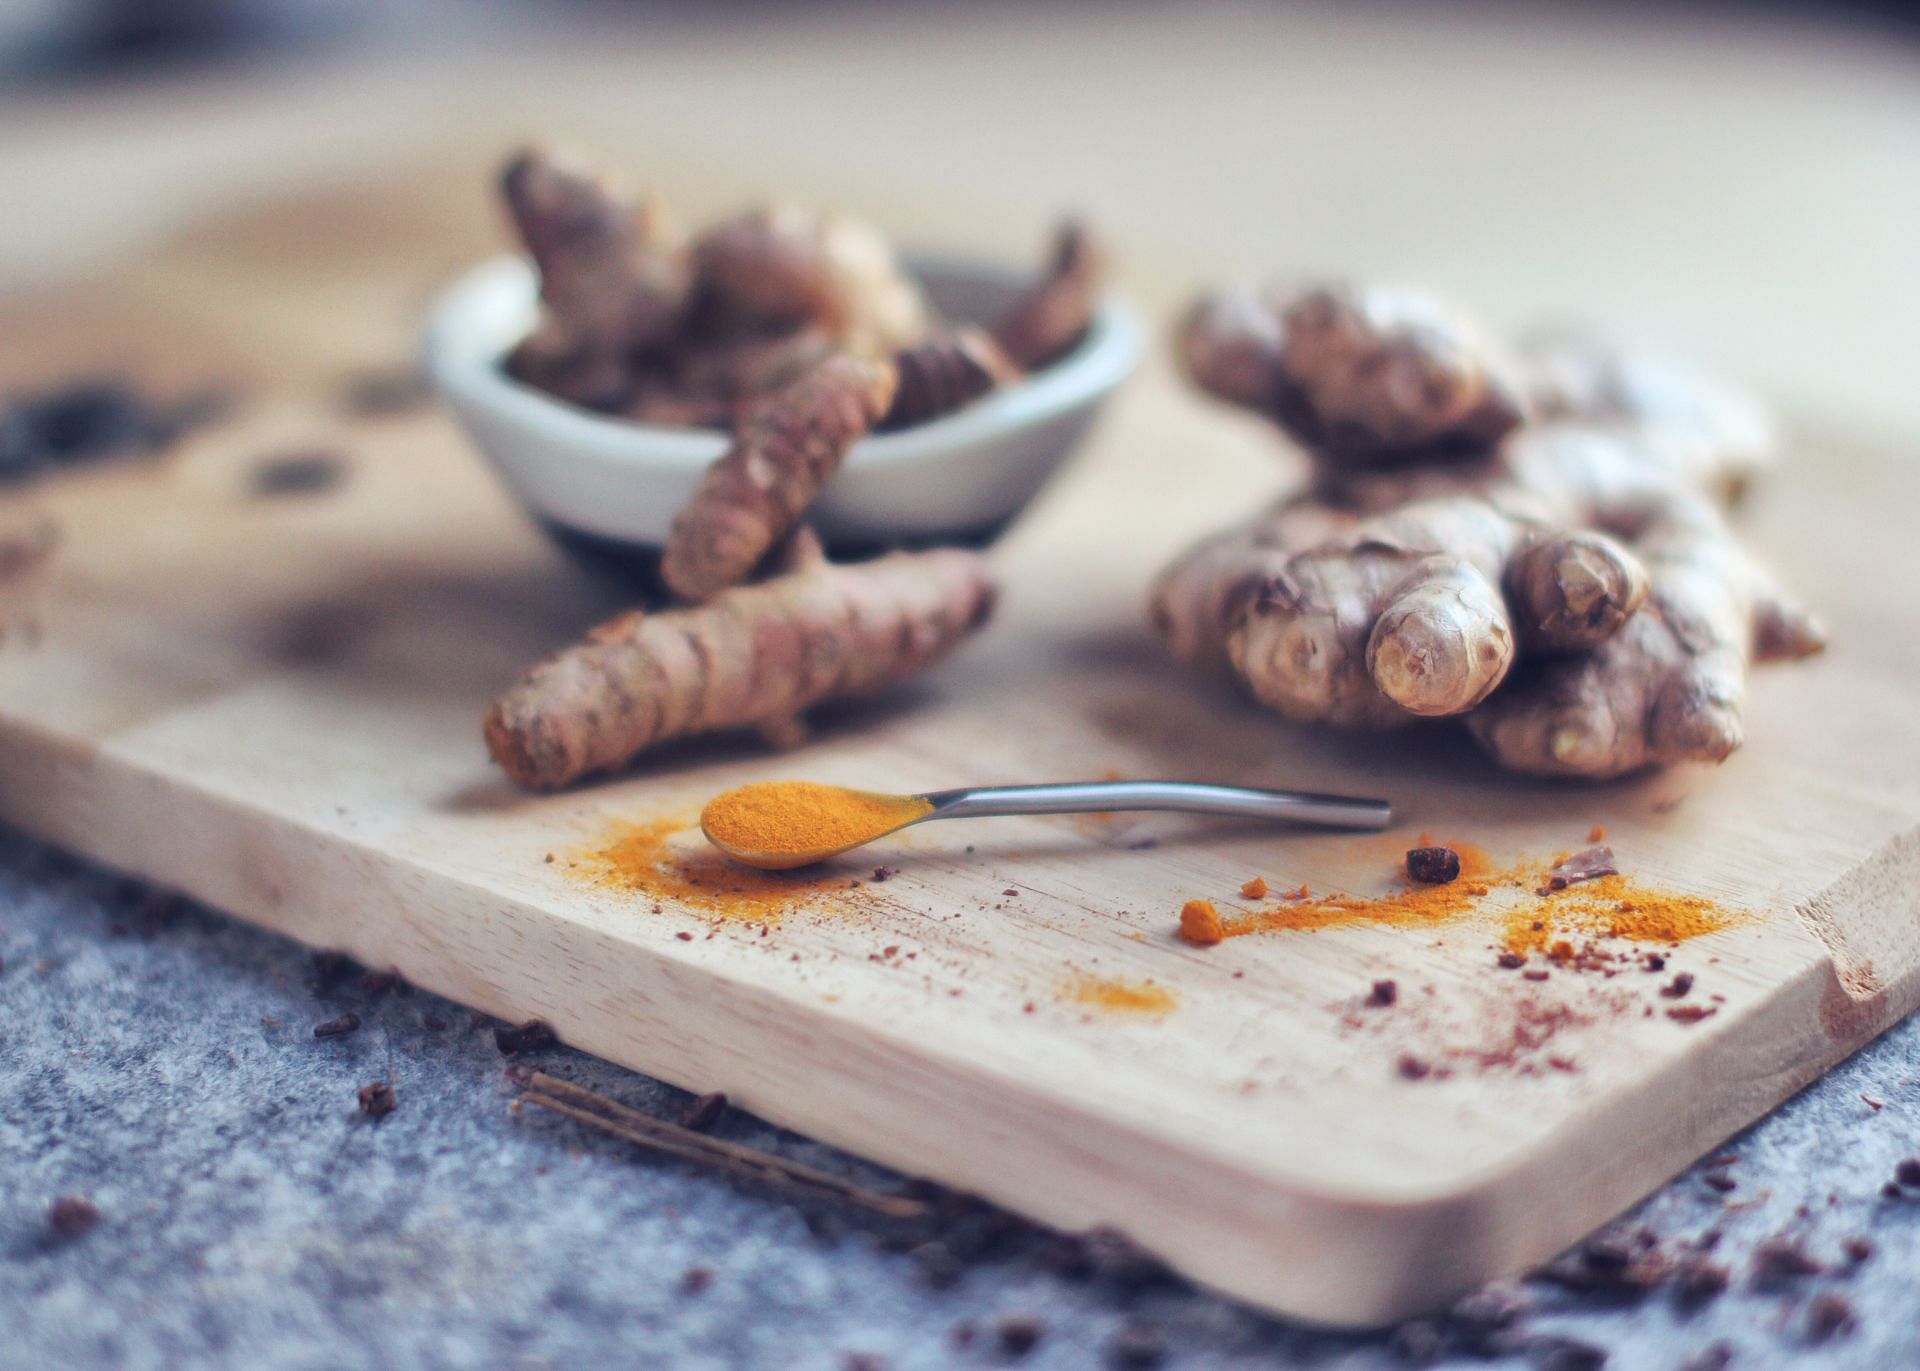 Due to its components, we can use ginger for nausea relief. (Image via Unsplash/ Julia Topp)